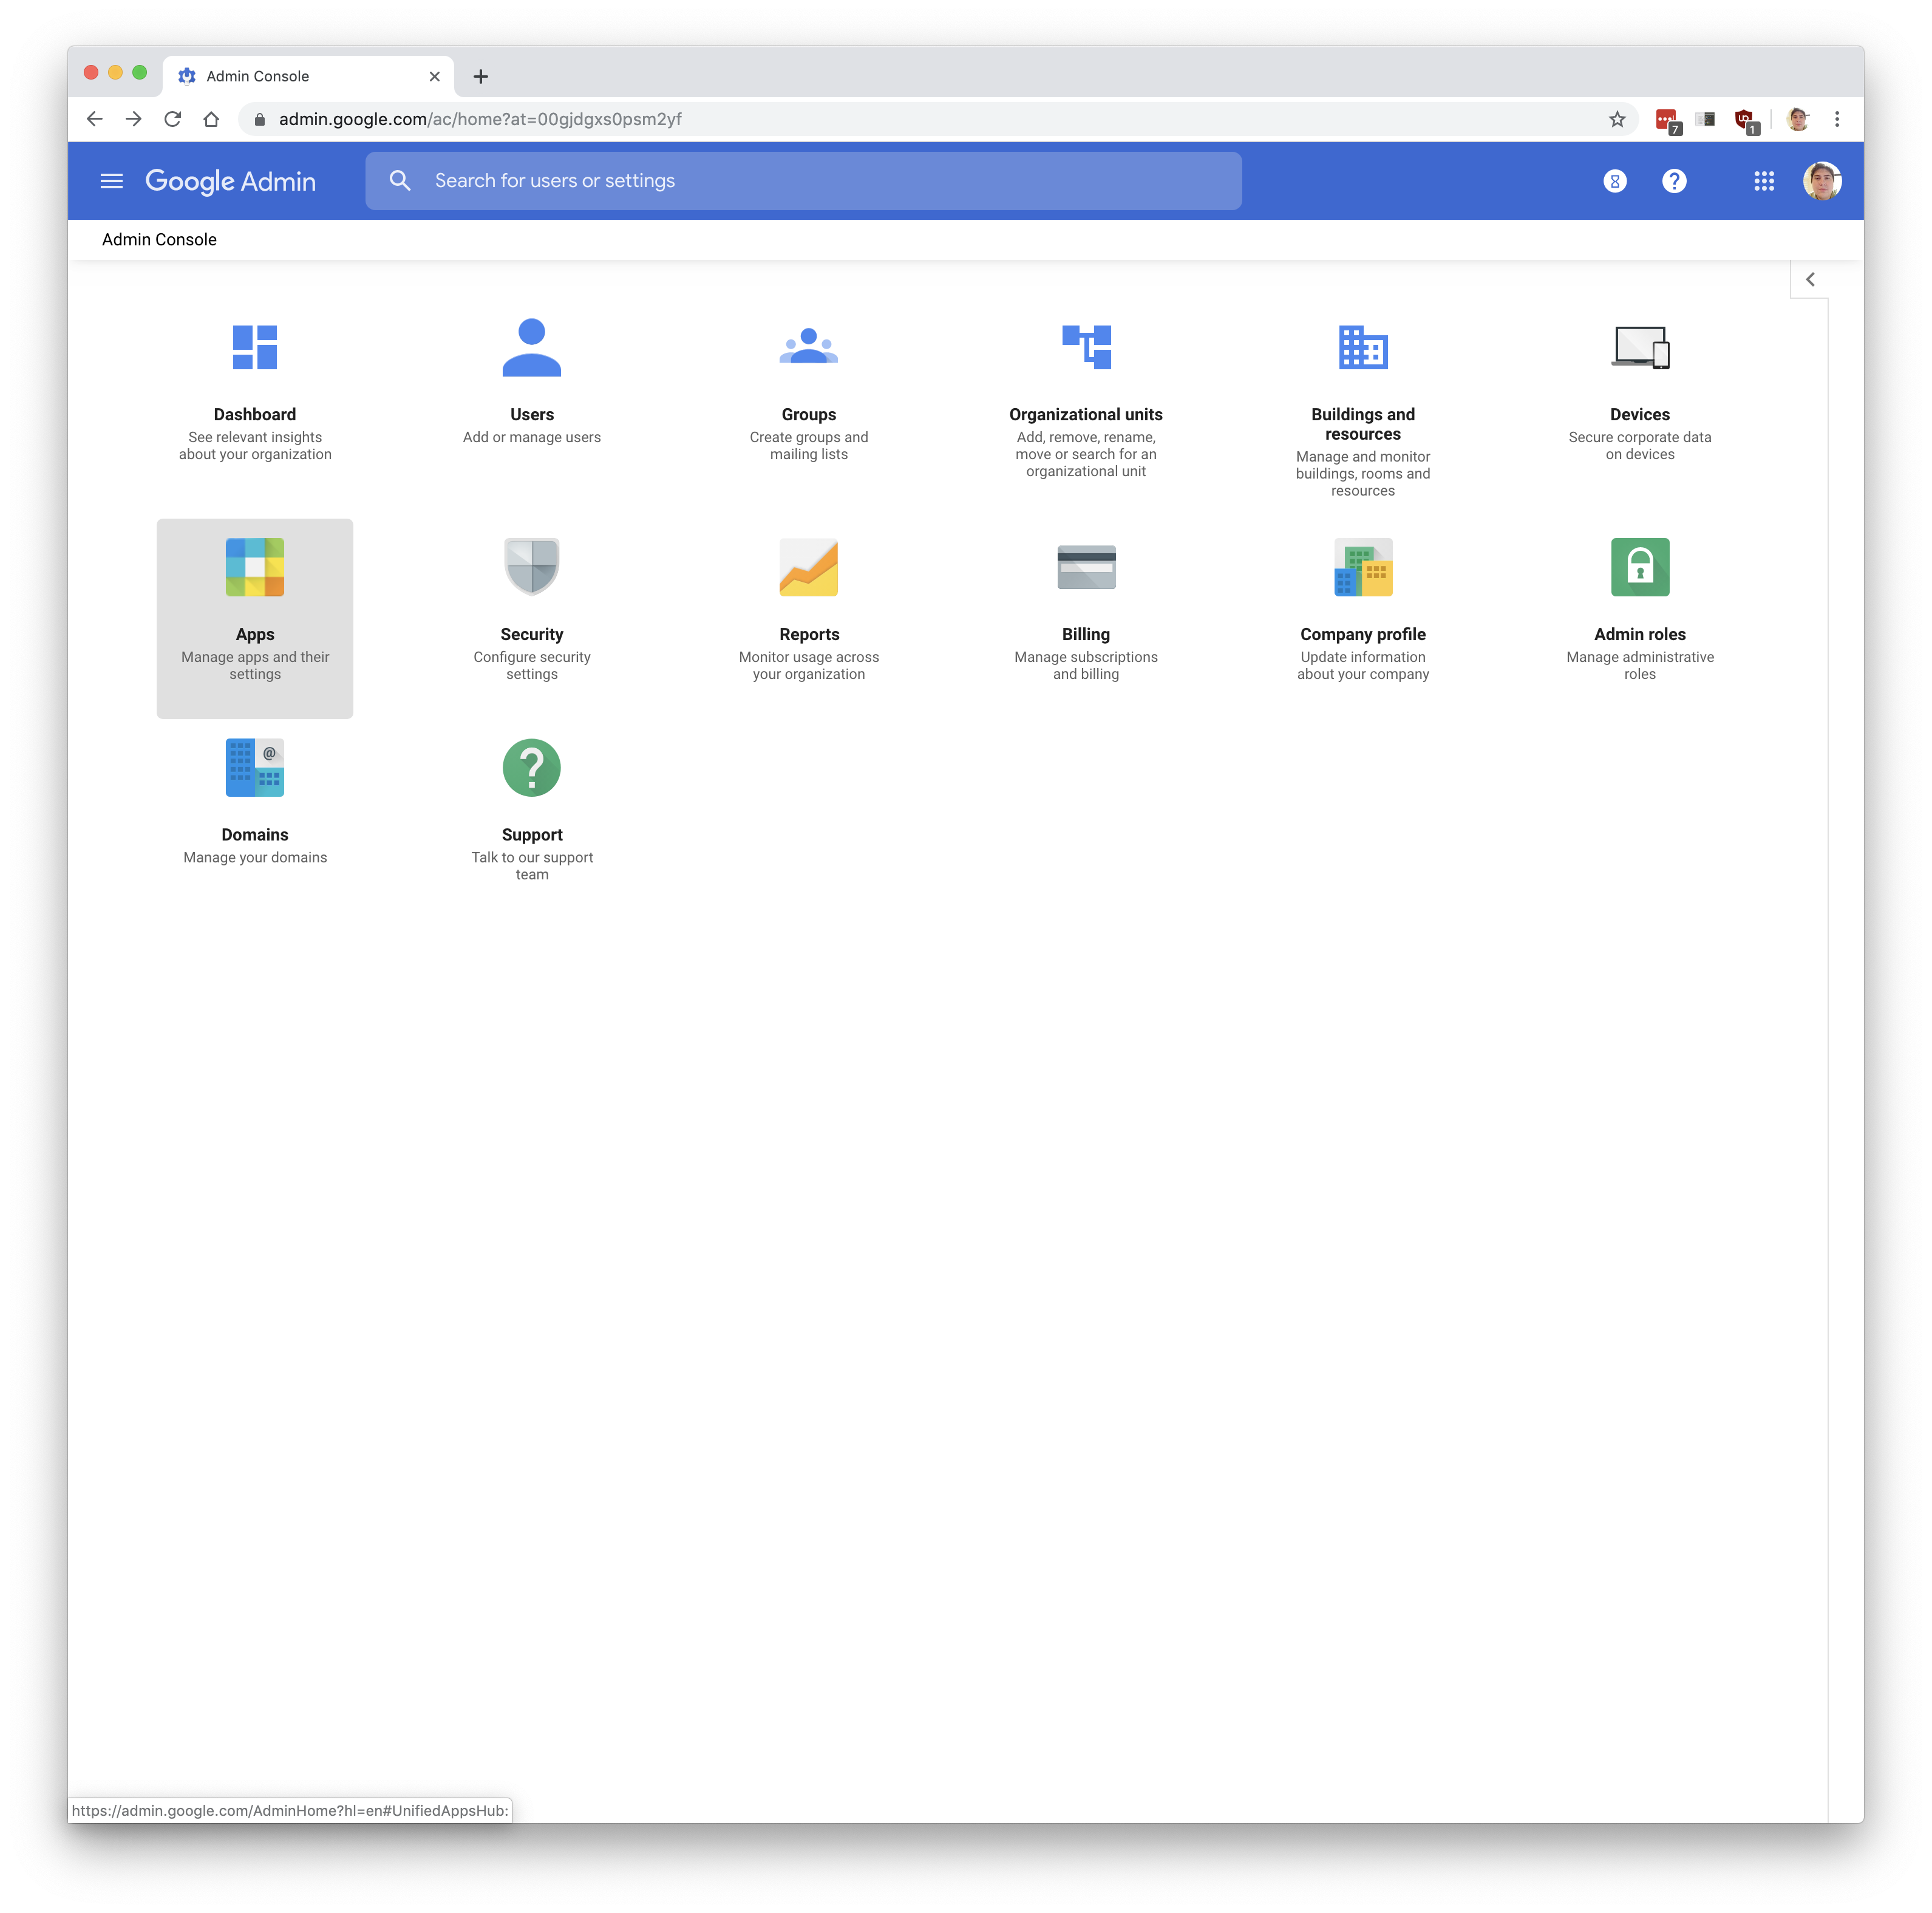 google-admin-console-home-page-apps.png